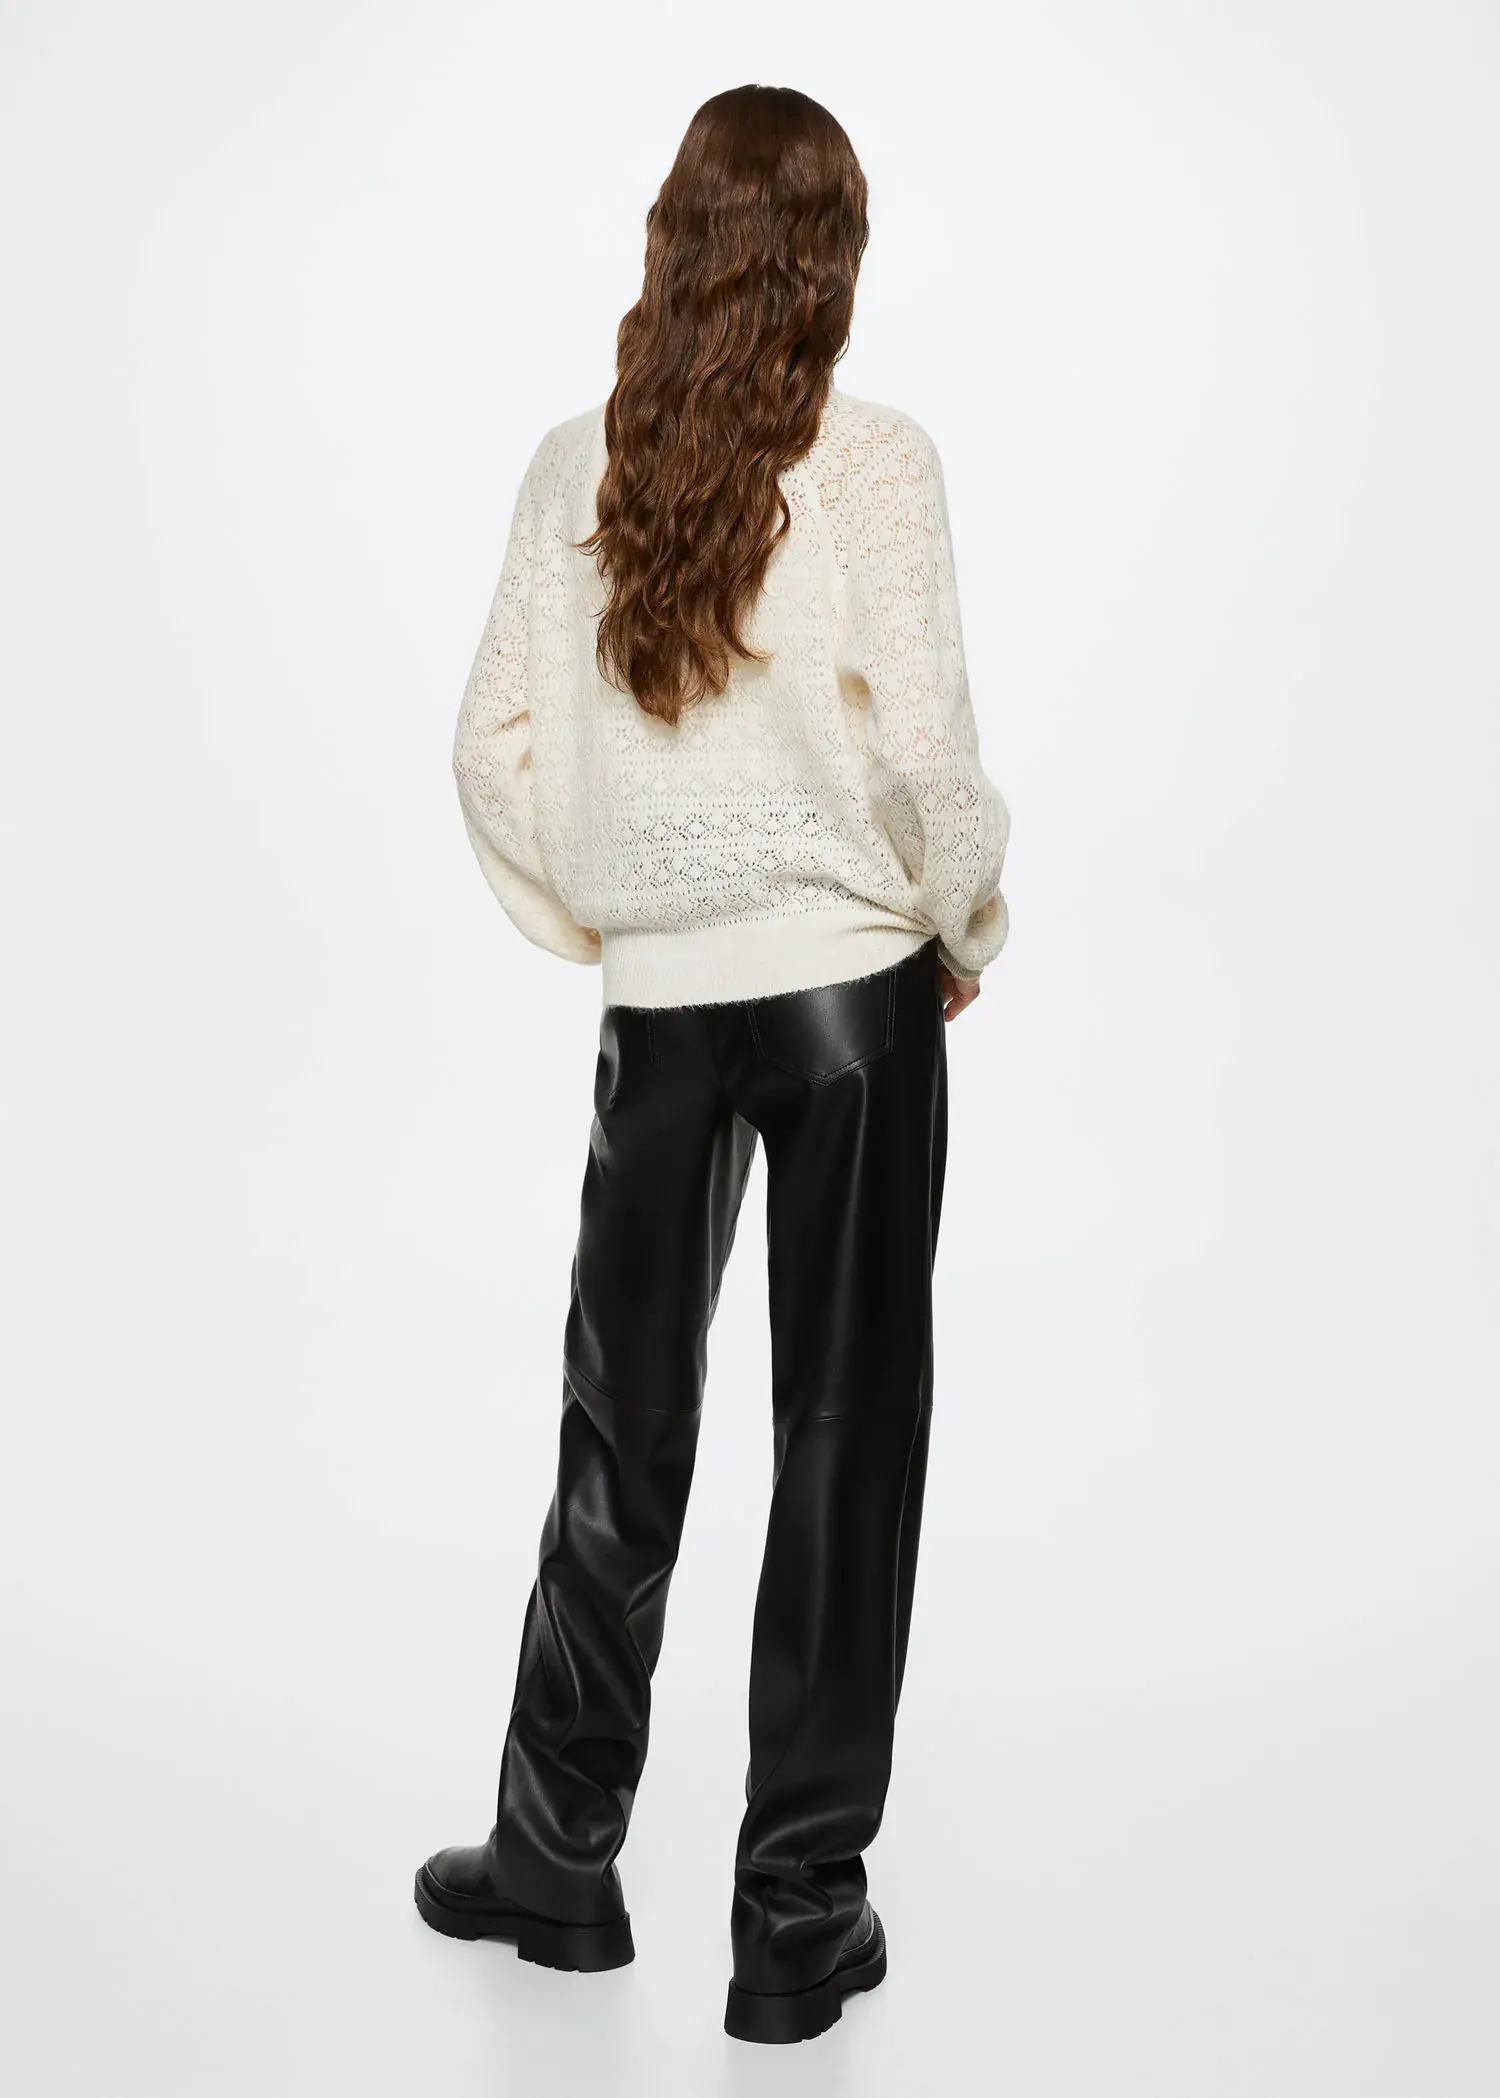 Mango Openwork knit sweater. a woman in a white sweater and black pants. 